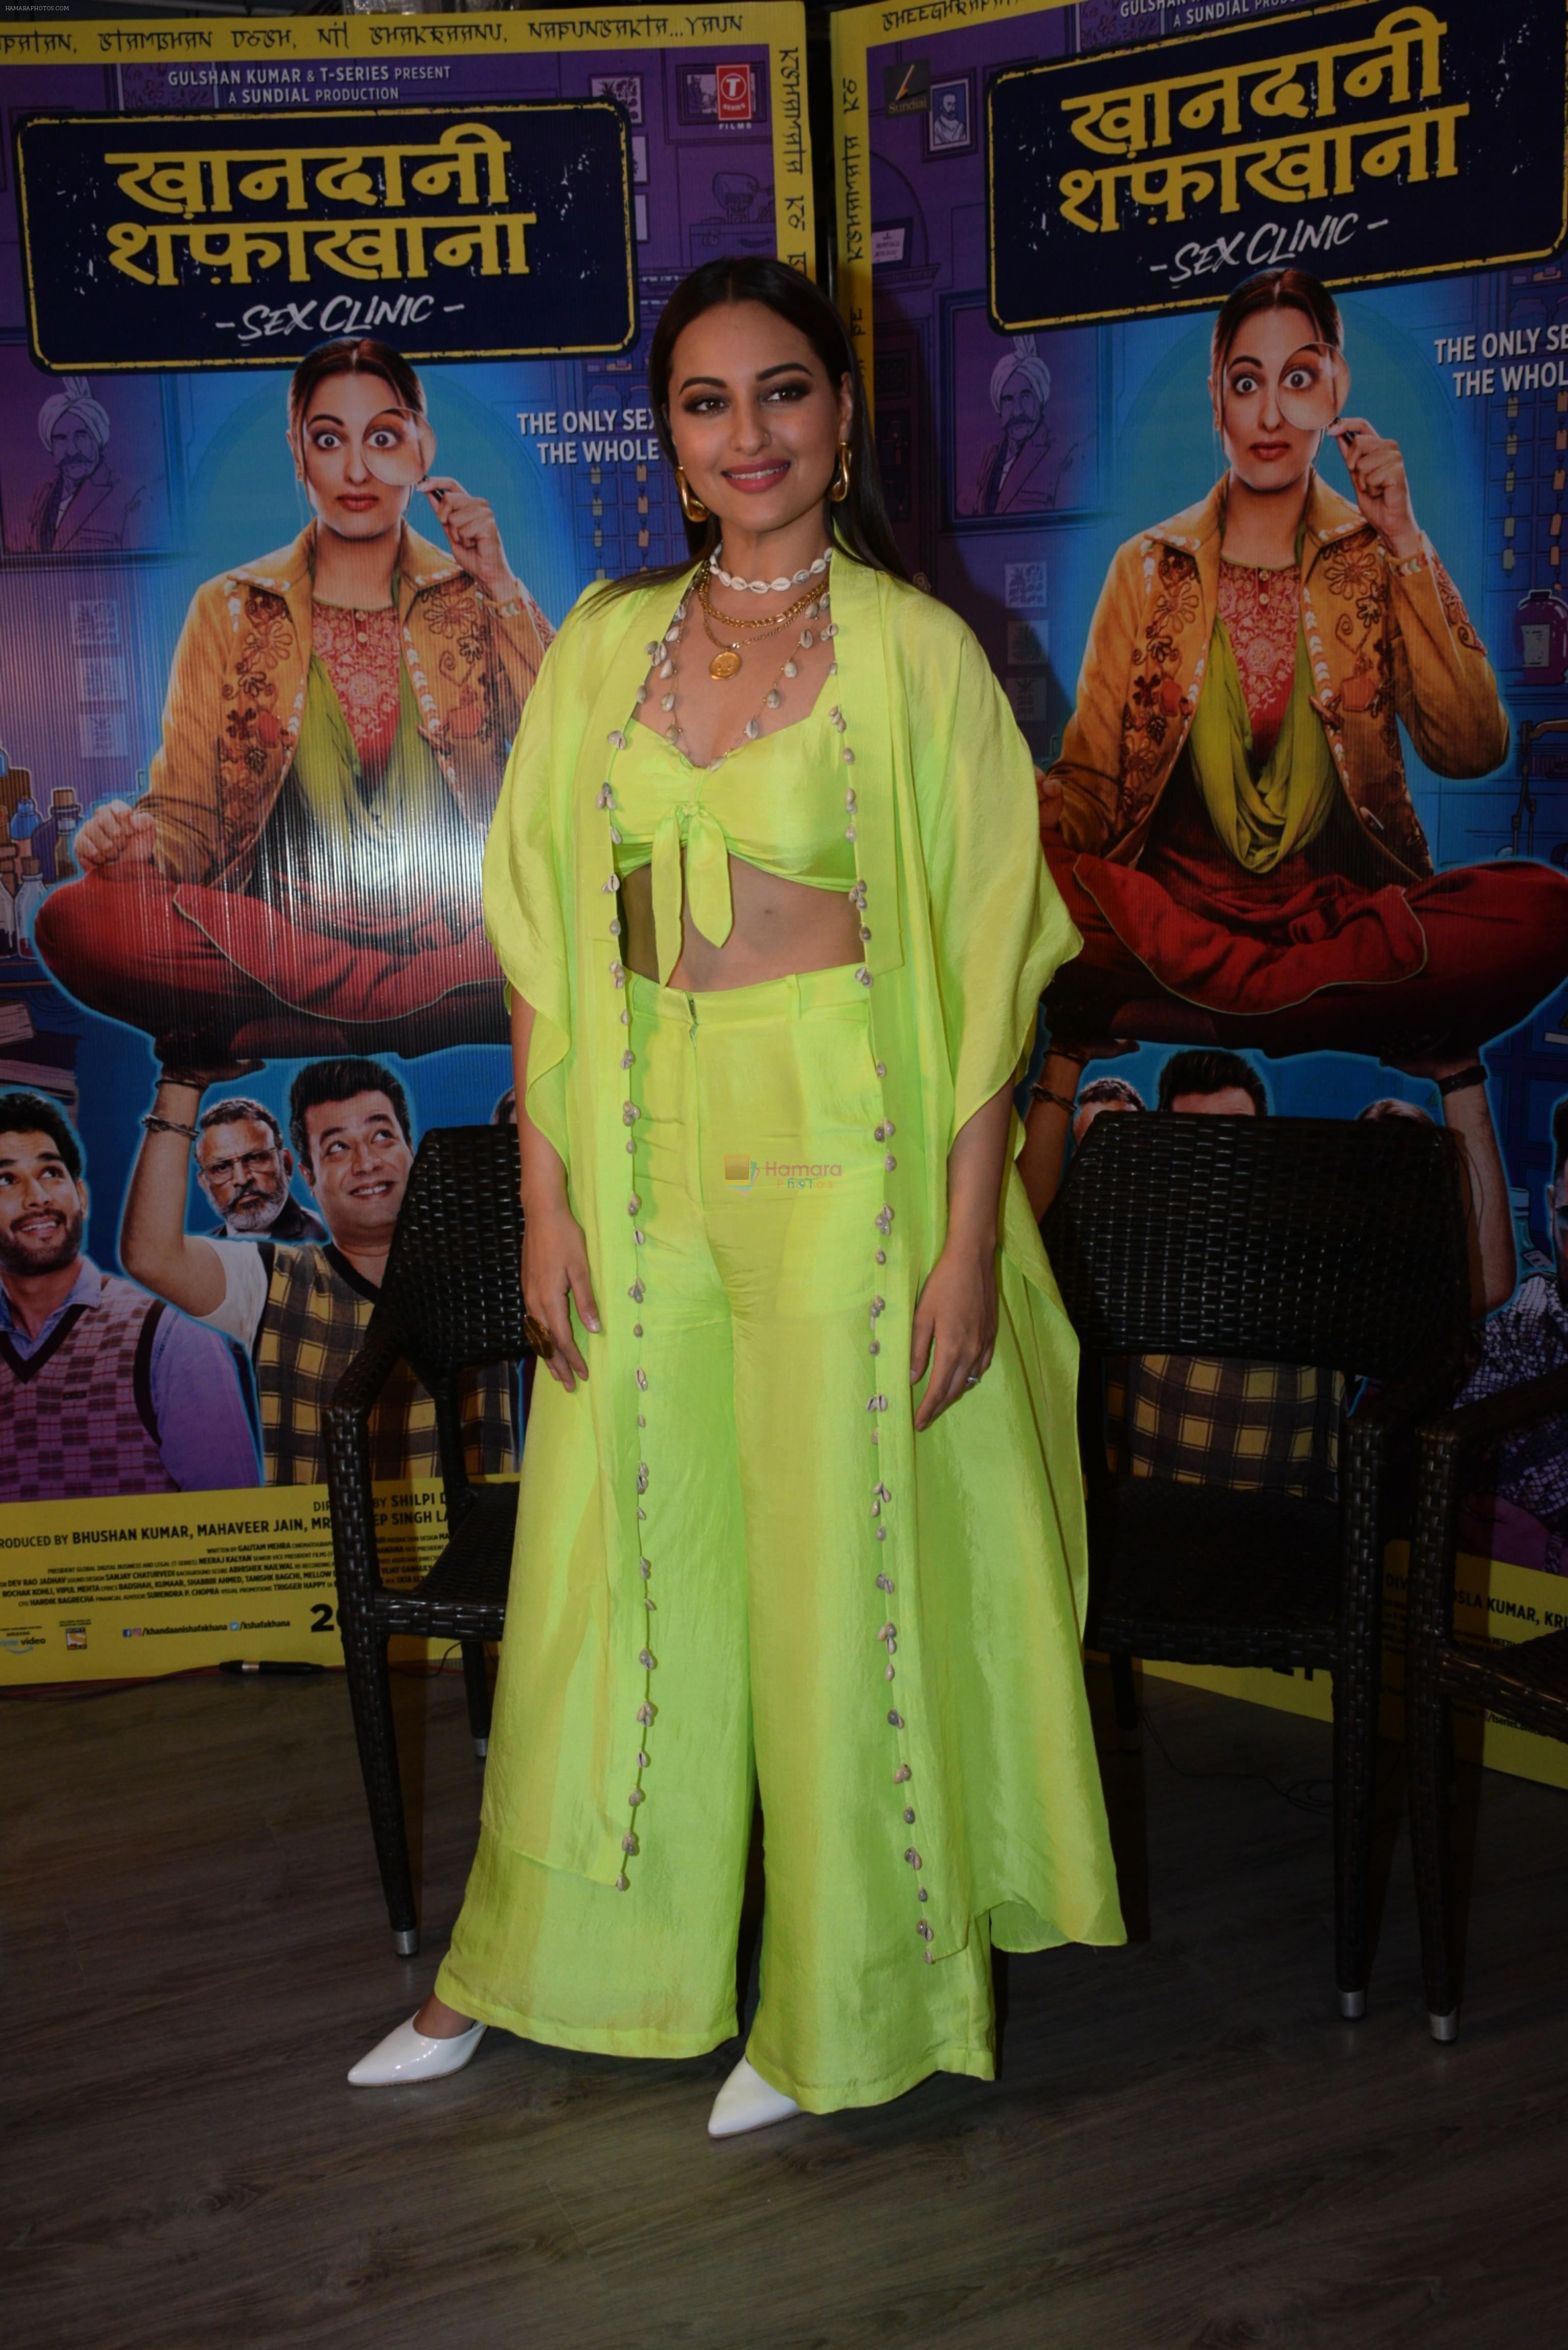 Sonakshi Sinha for the promotions of film Khandaani Shafakhana at Tseries office in andheri on 21st June 2019